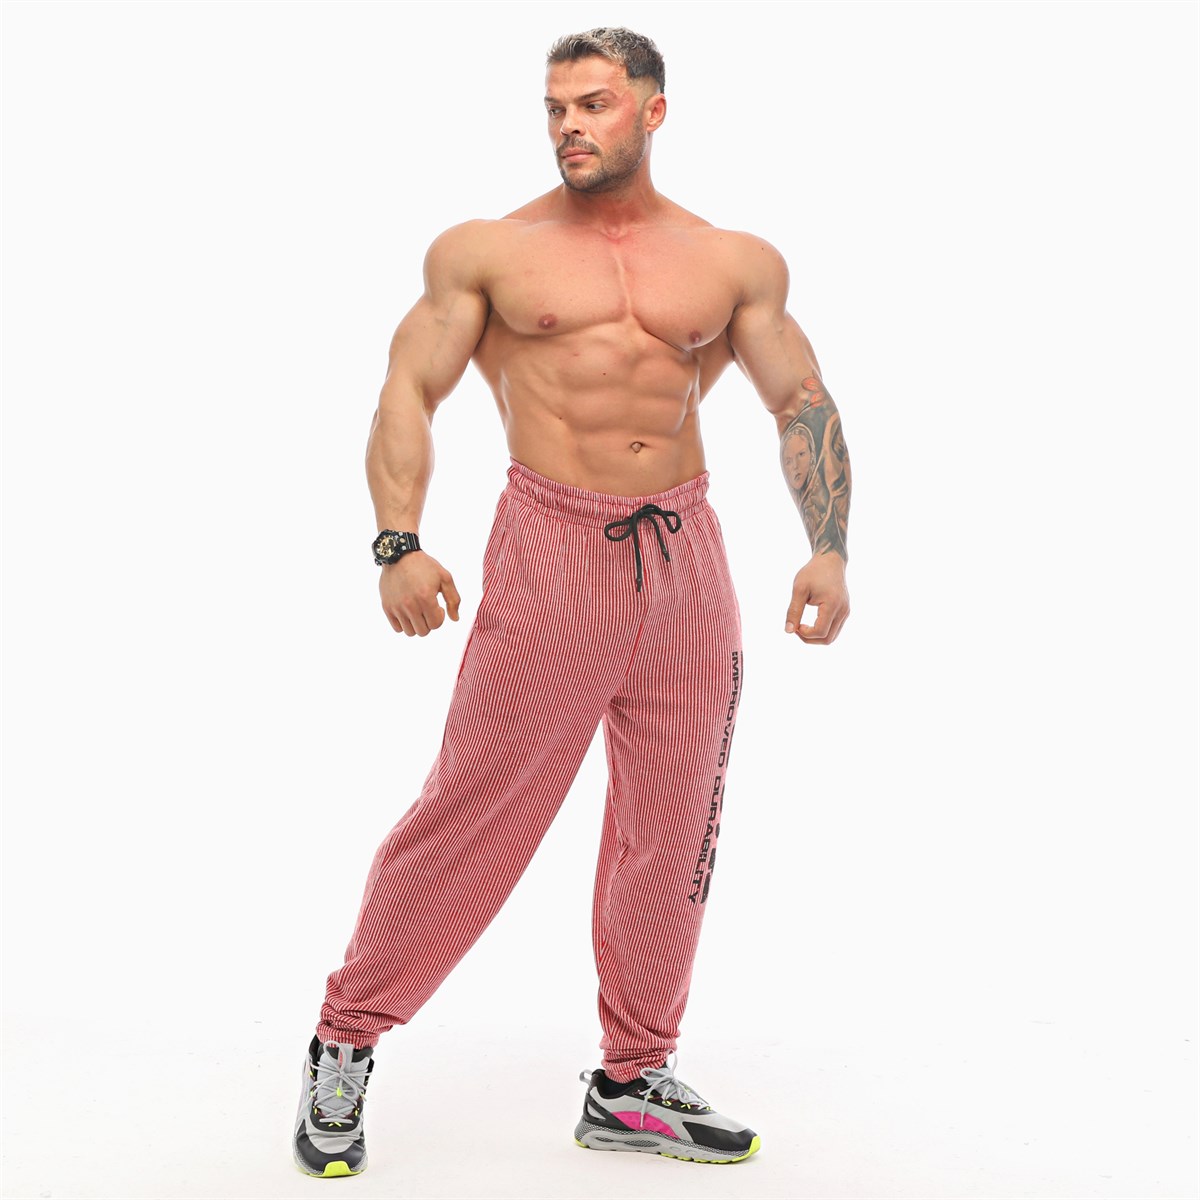 Buy Muscle AliveMens Gym Baggy Pants for Bodybuilding Fitness